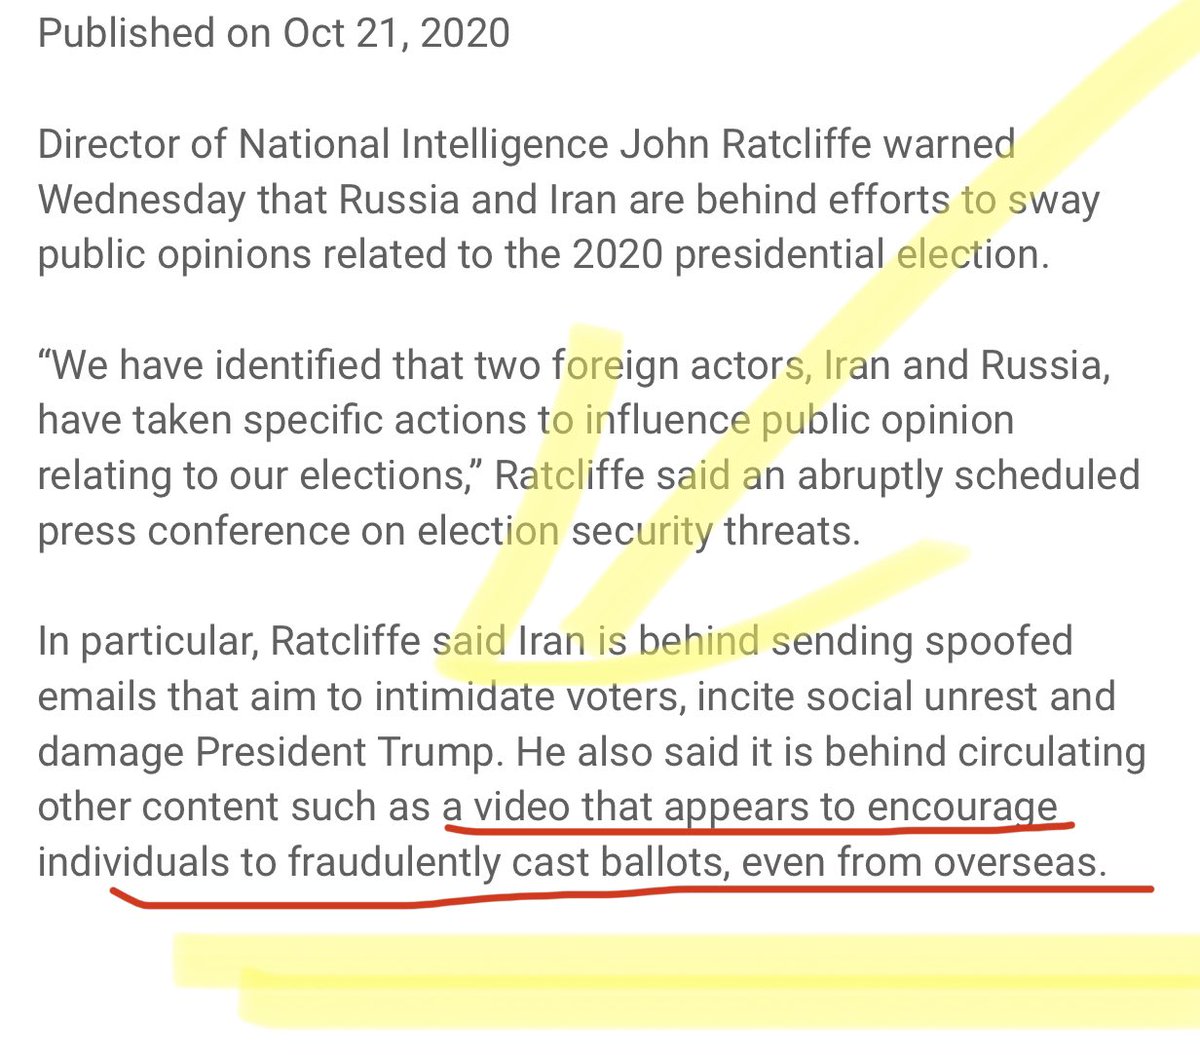  @DNI_Ratcliffe said that “a video that appears to encourage individuals to fraudulently cast ballots, even from overseas.”Imagine if Russia got a hold of some ballots, voted for Biden, and sent them from overseas to stir up a problemAre they that sneaky? Yes. Yes they are.